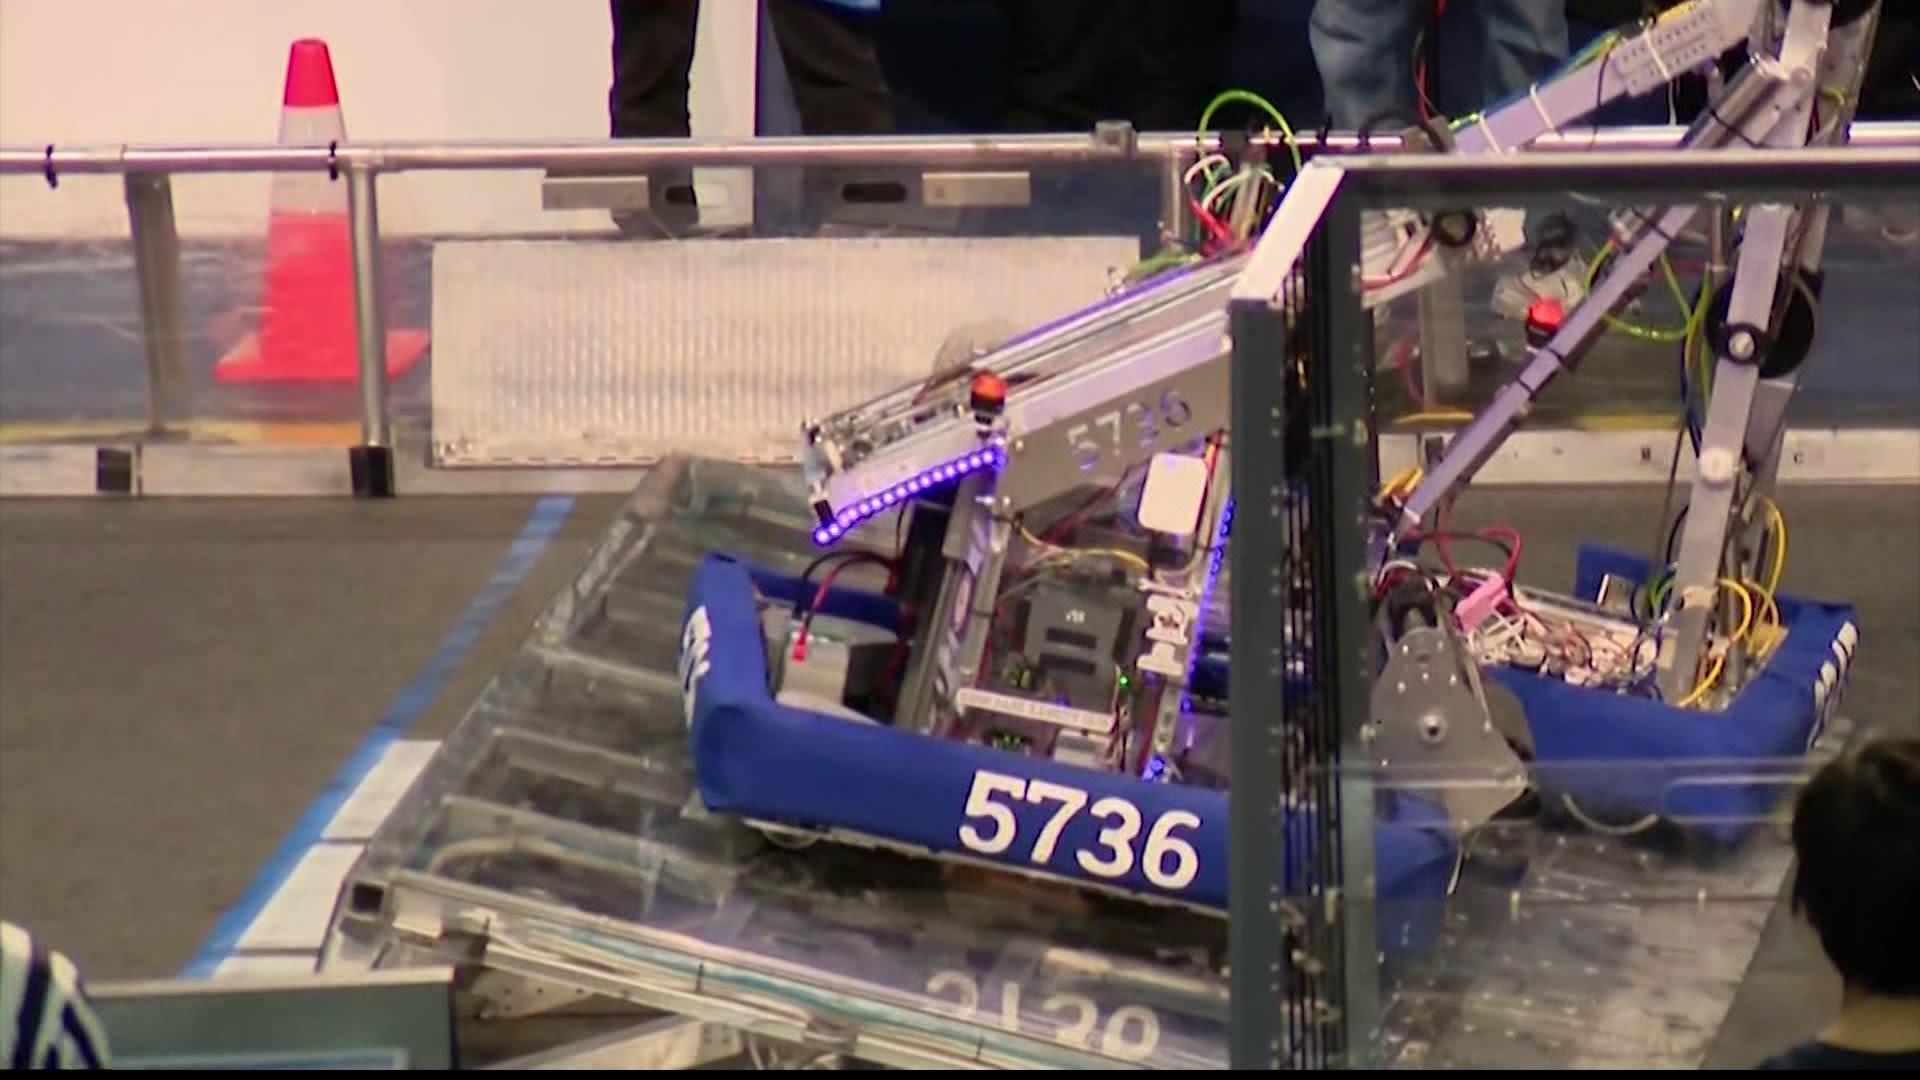 45 teams square off in robotics competition at Hofstra University